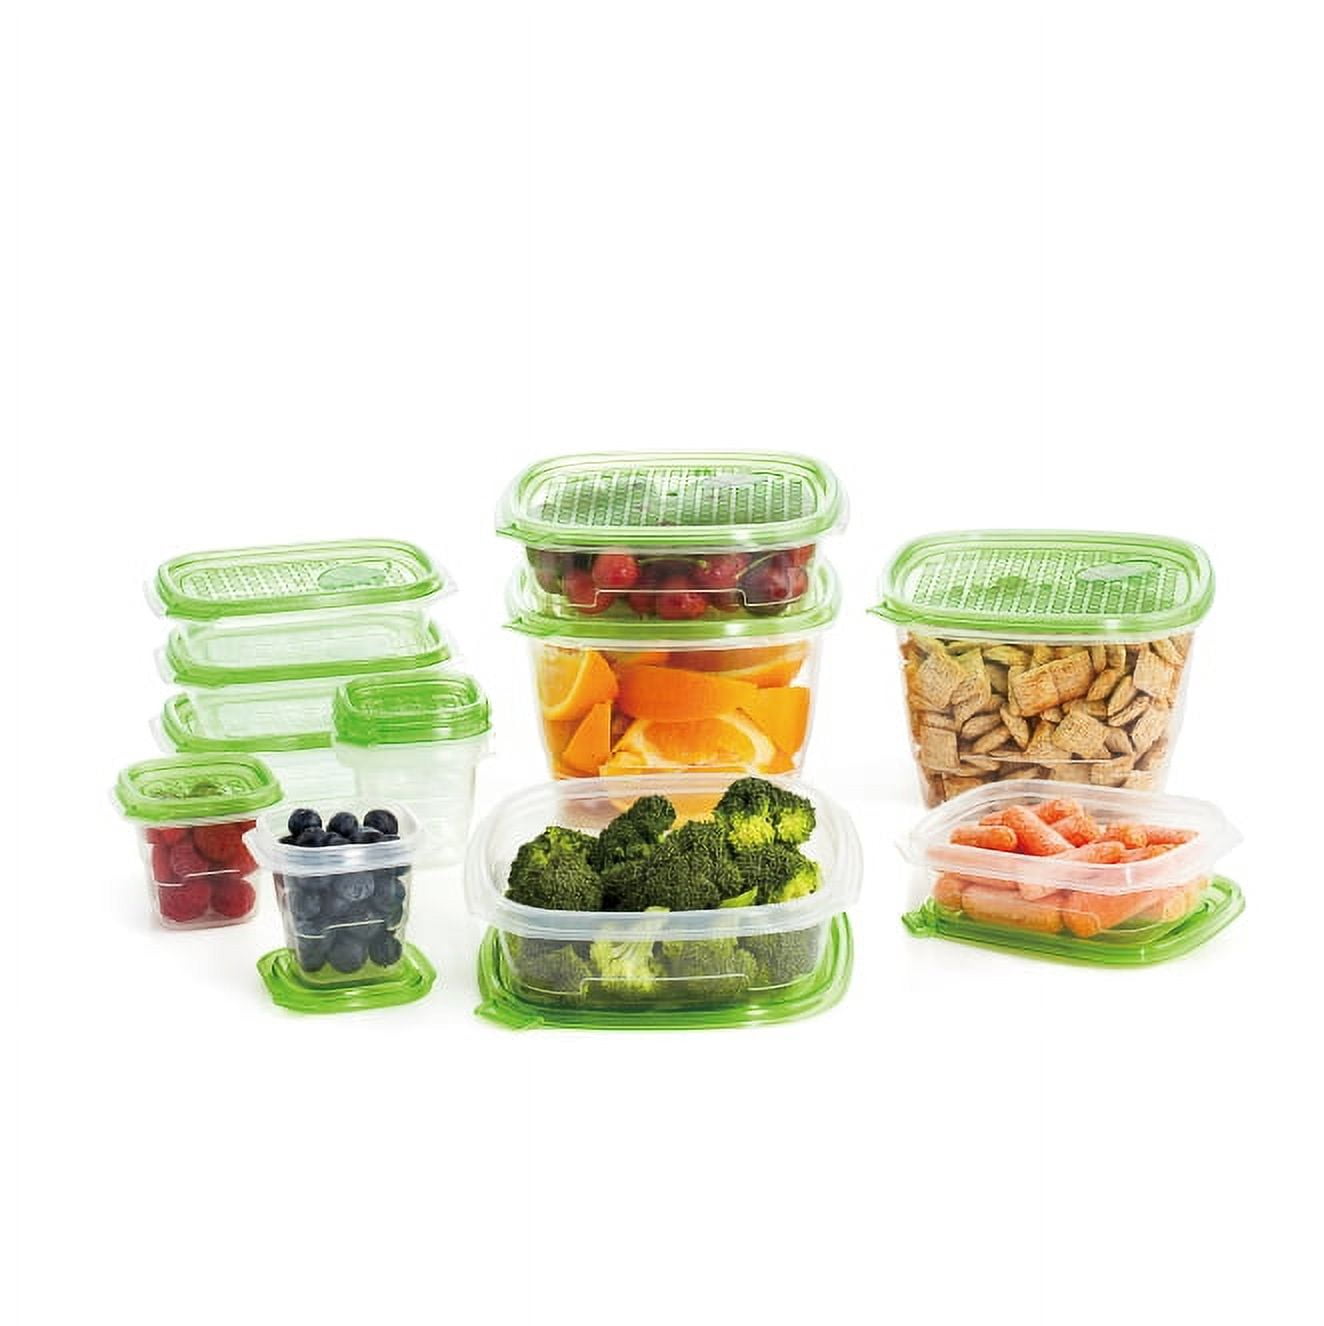 LEXI HOME 32-Piece Durable Meal Prep Plastic Food Containers with